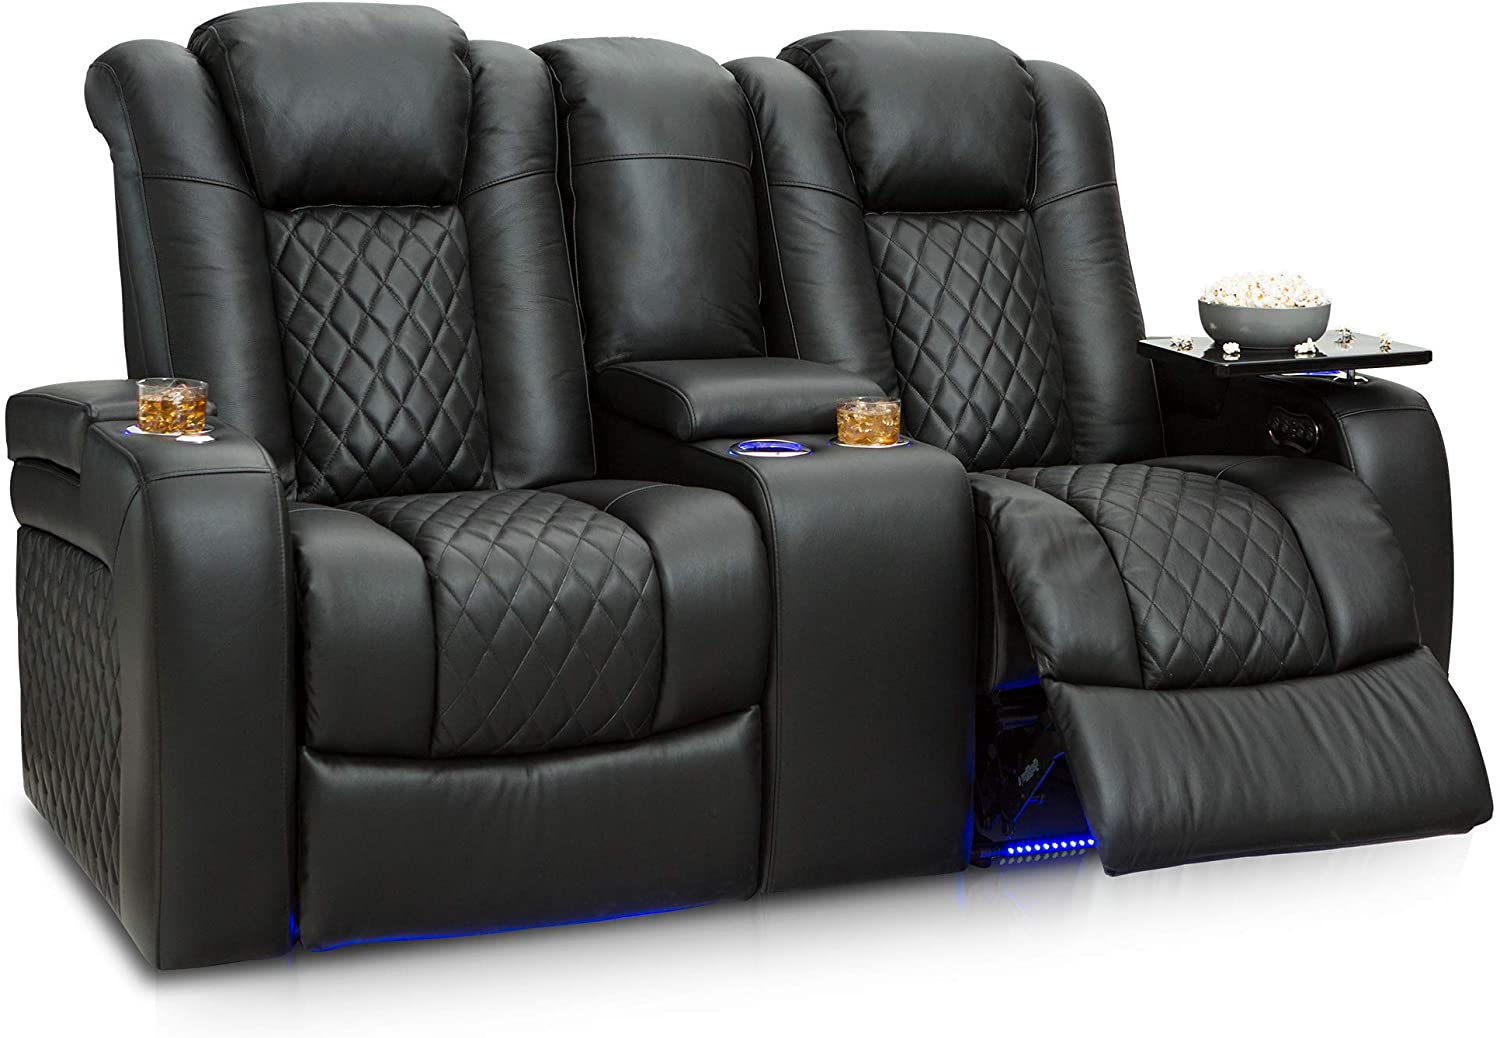 Seatcraft Anthem Home Theater Seating